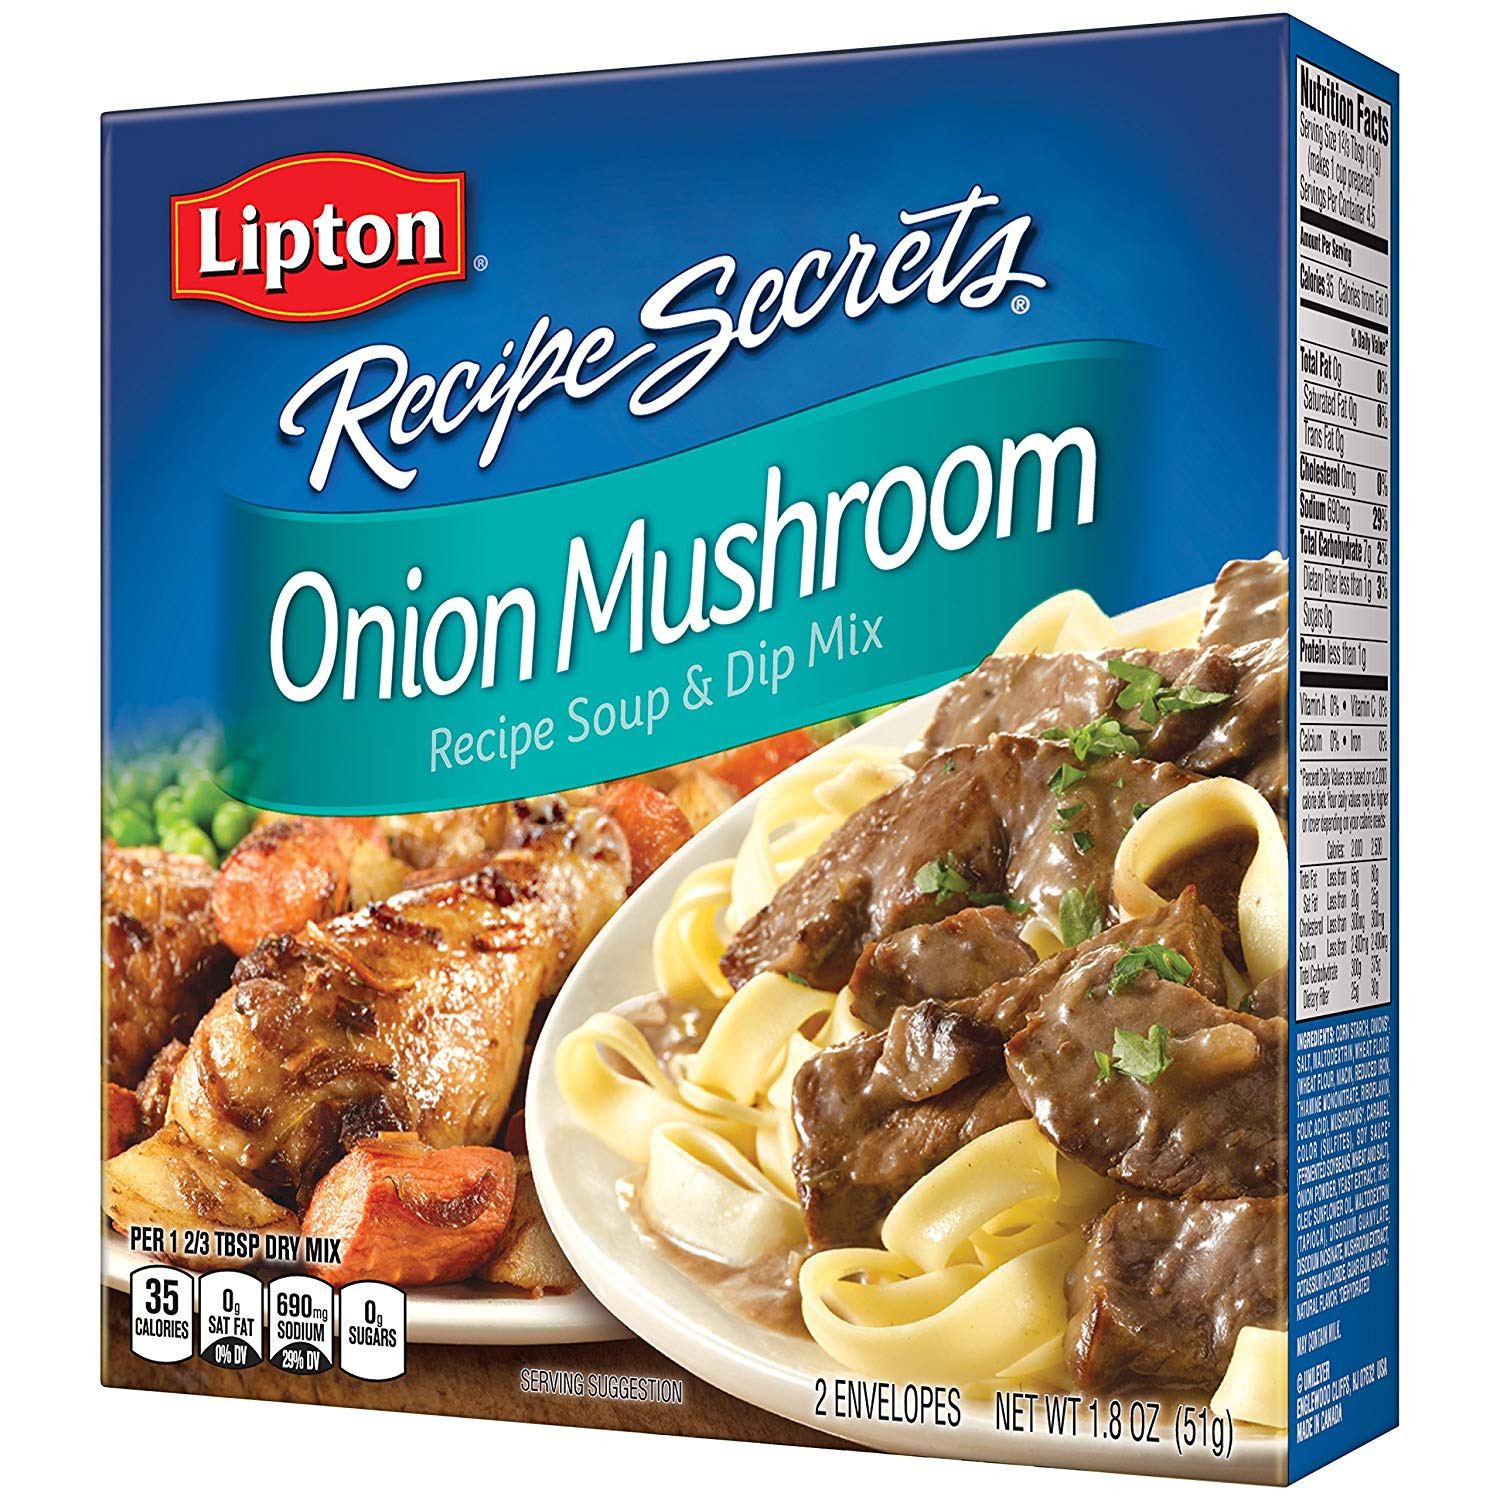 Lipton Onion Soup Meatloaf Recipe
 Meatloaf Recipe With Lipton ion Mushroom Soup Mix